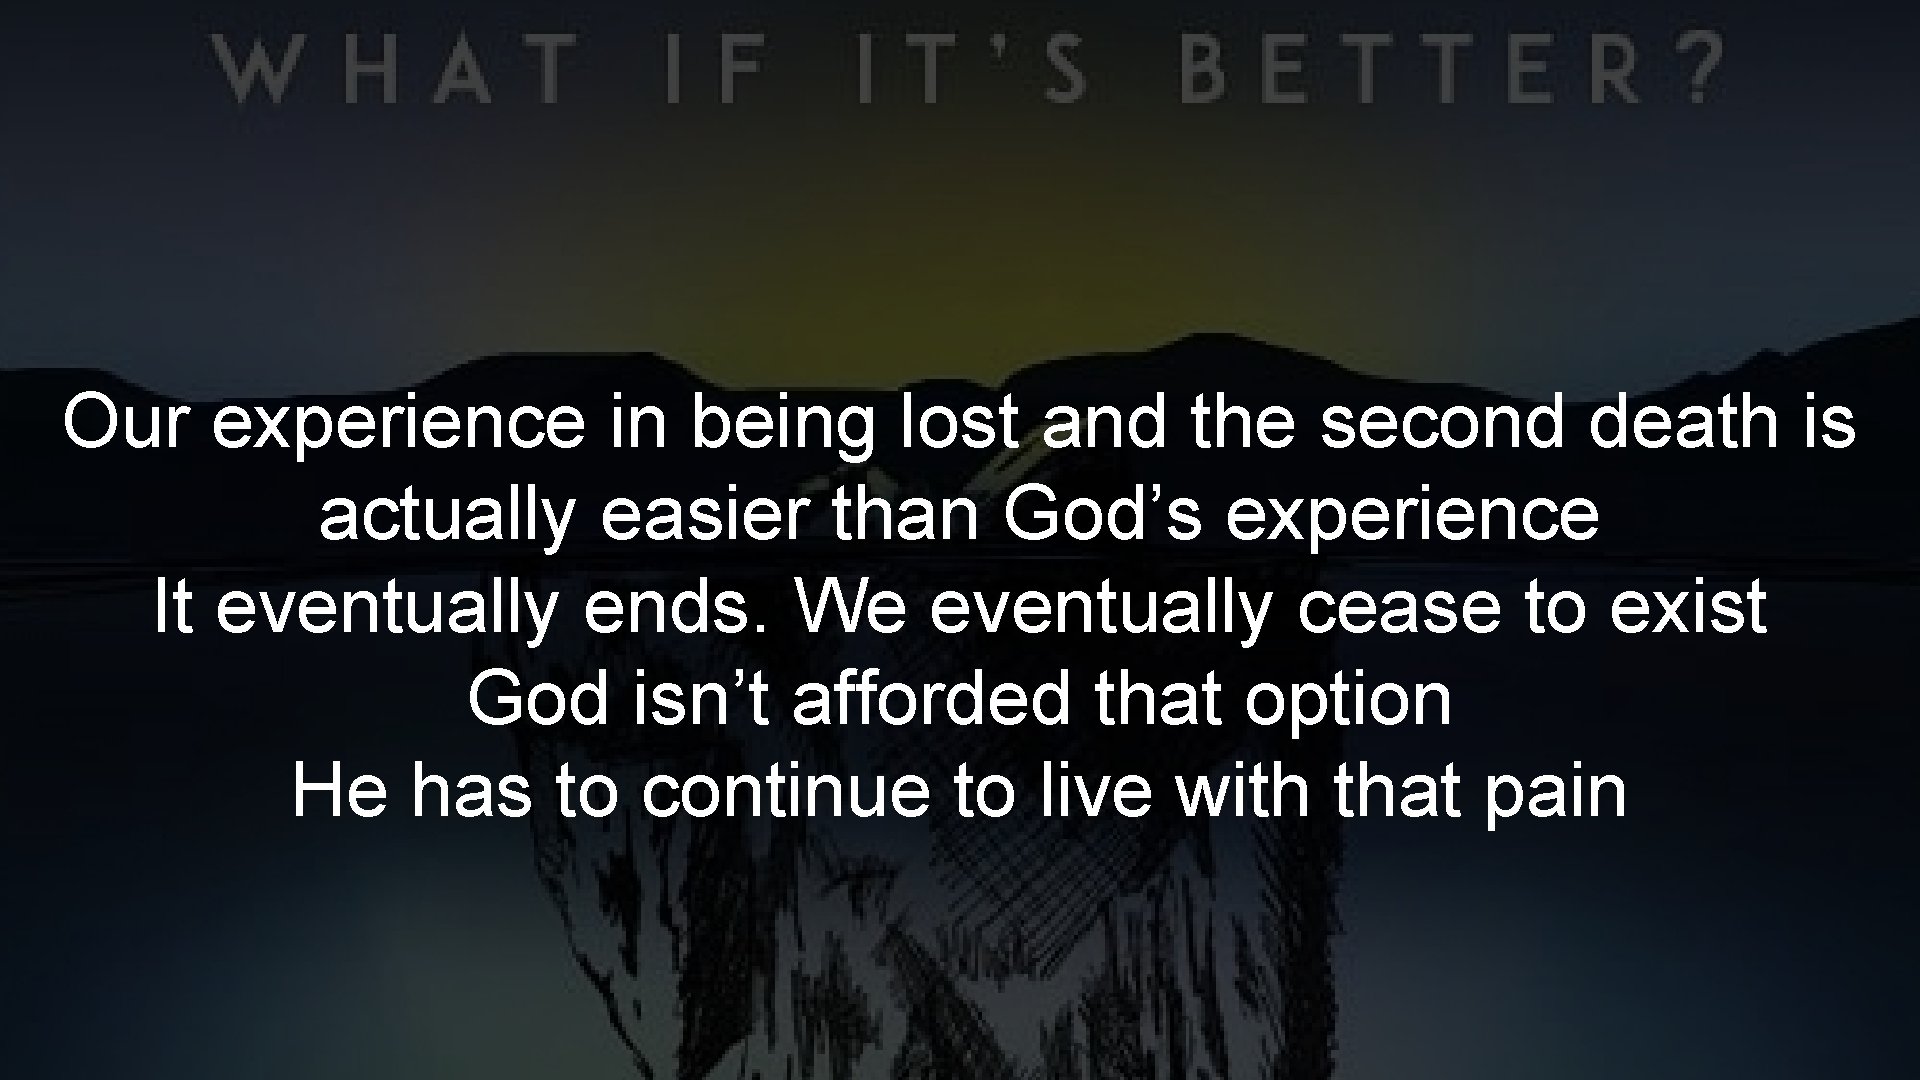 Our experience in being lost and the second death is actually easier than God’s